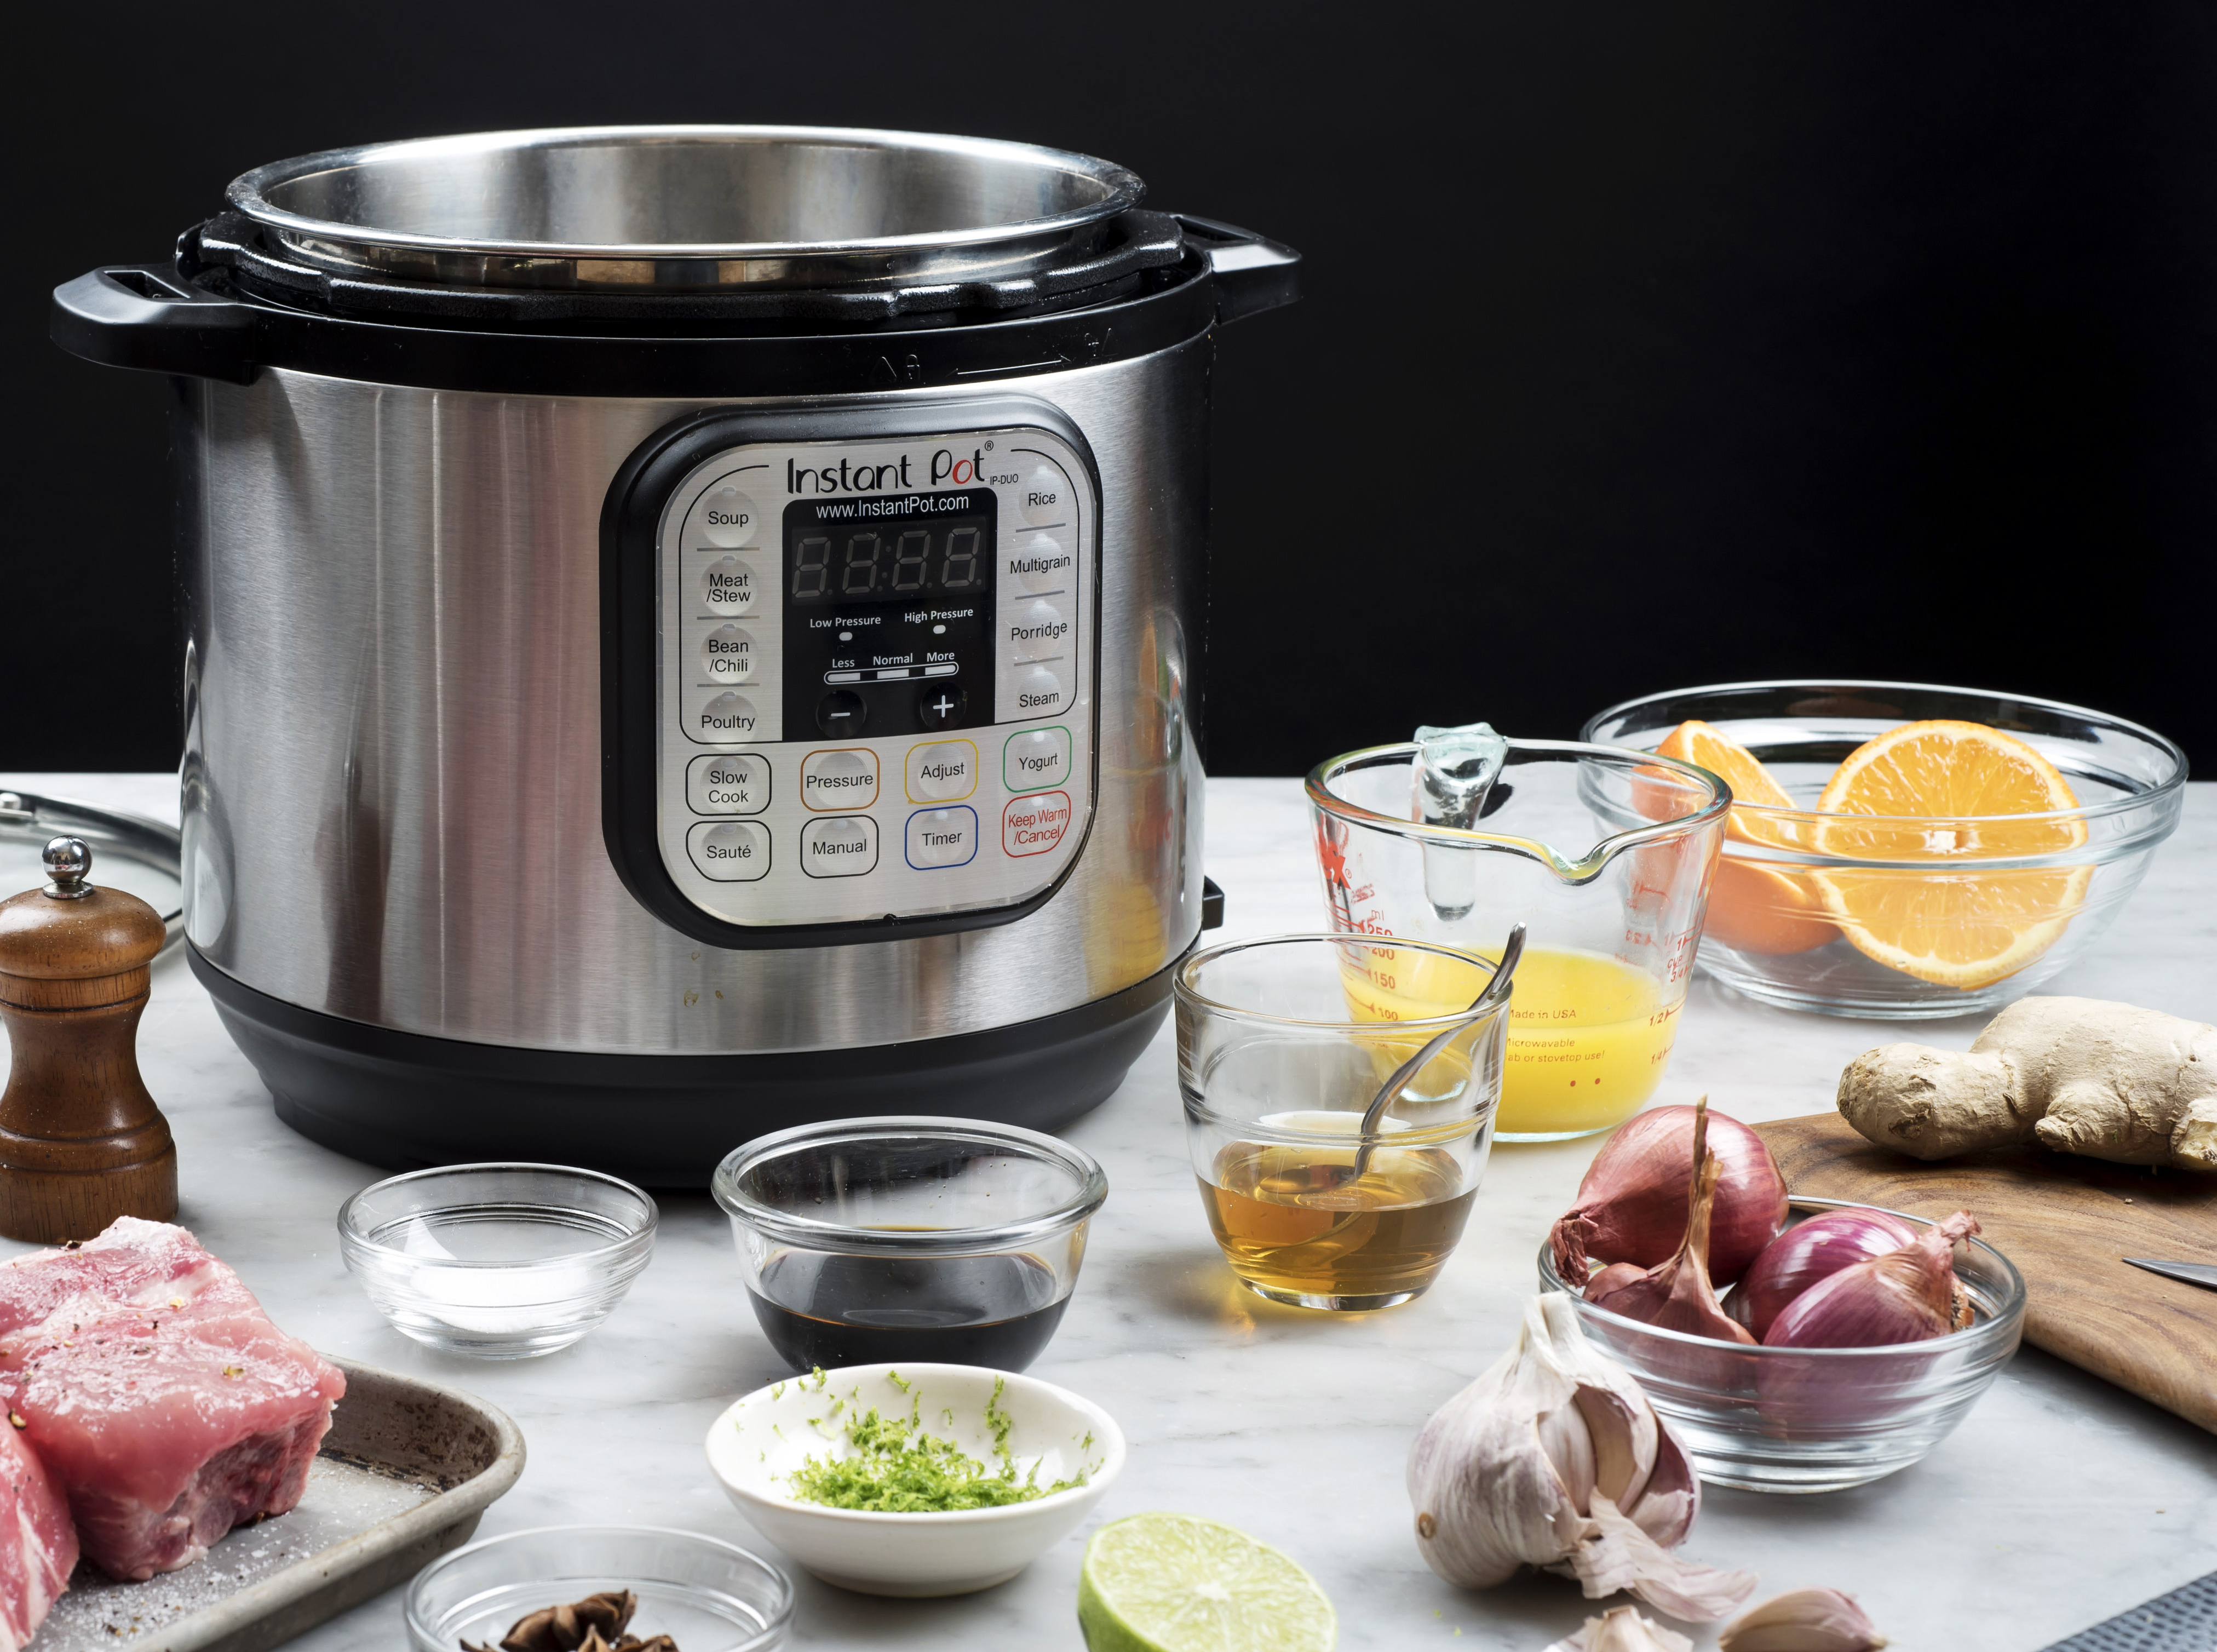 Maker of Pyrex, Instant Pot files for Chapter 11 bankruptcy